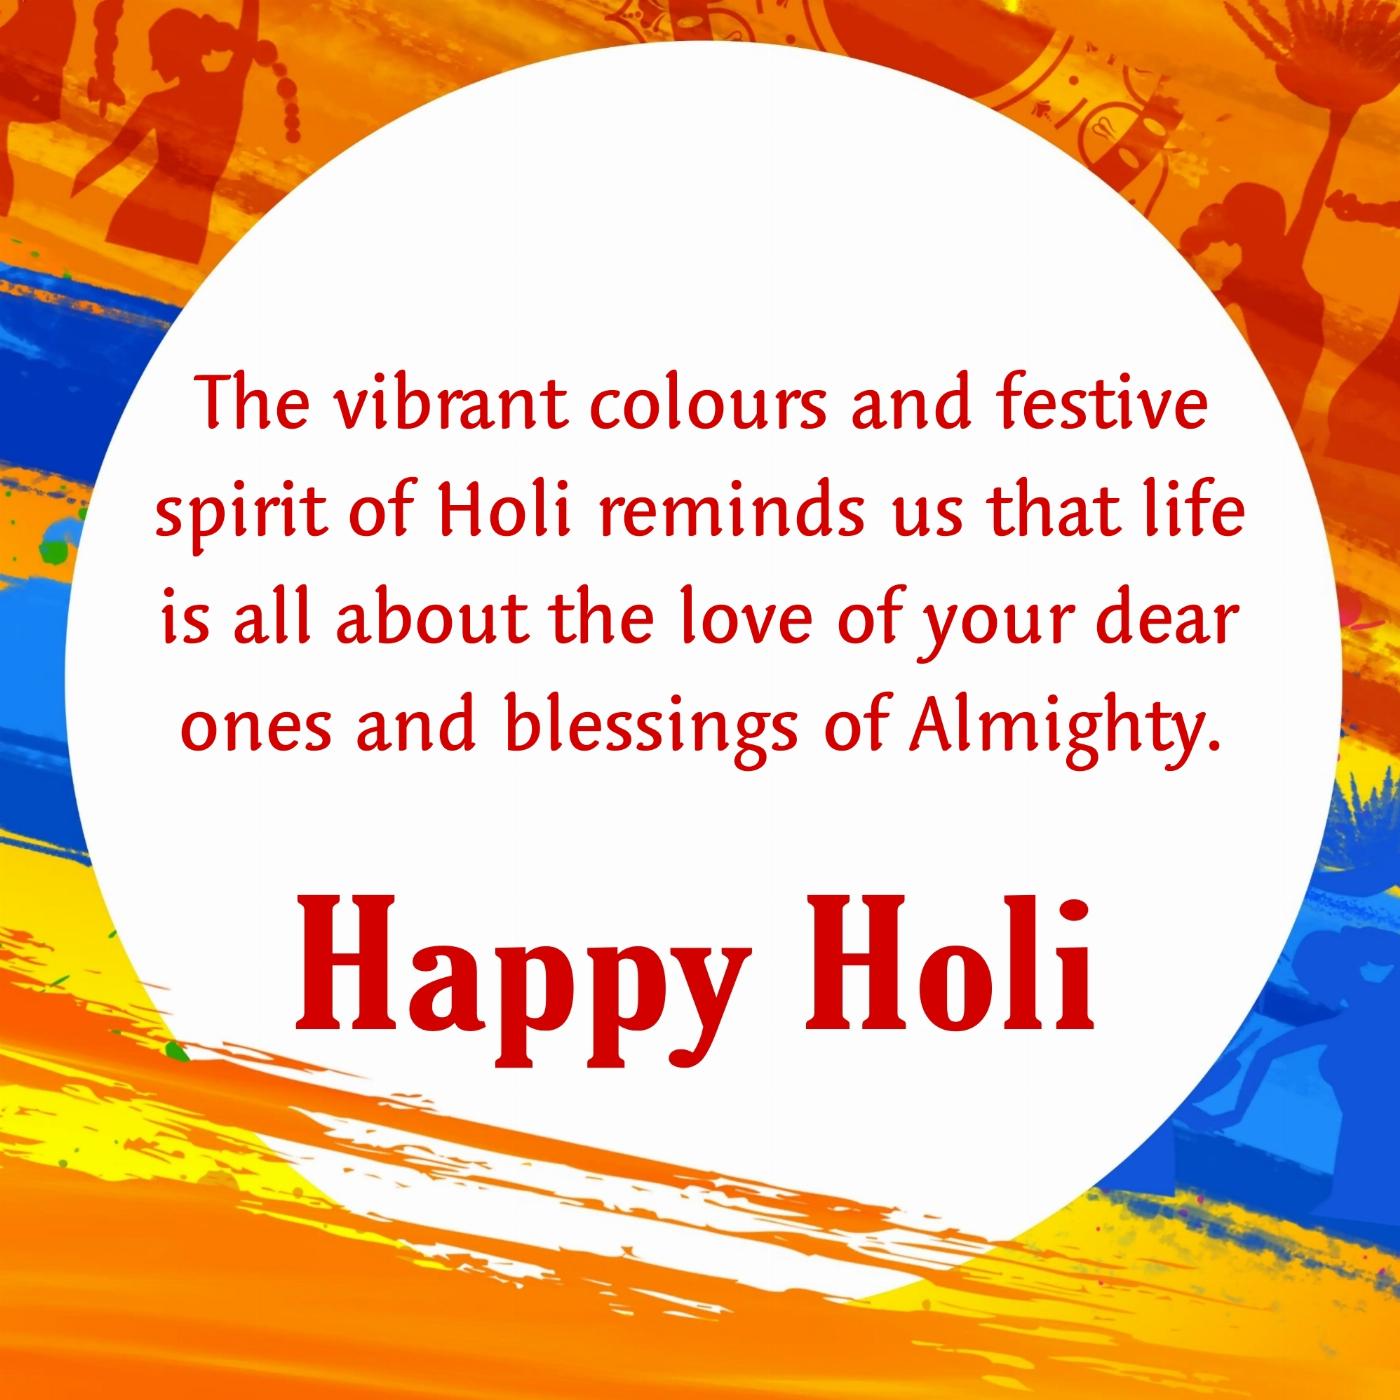 The vibrant colours and festive spirit of Holi reminds us